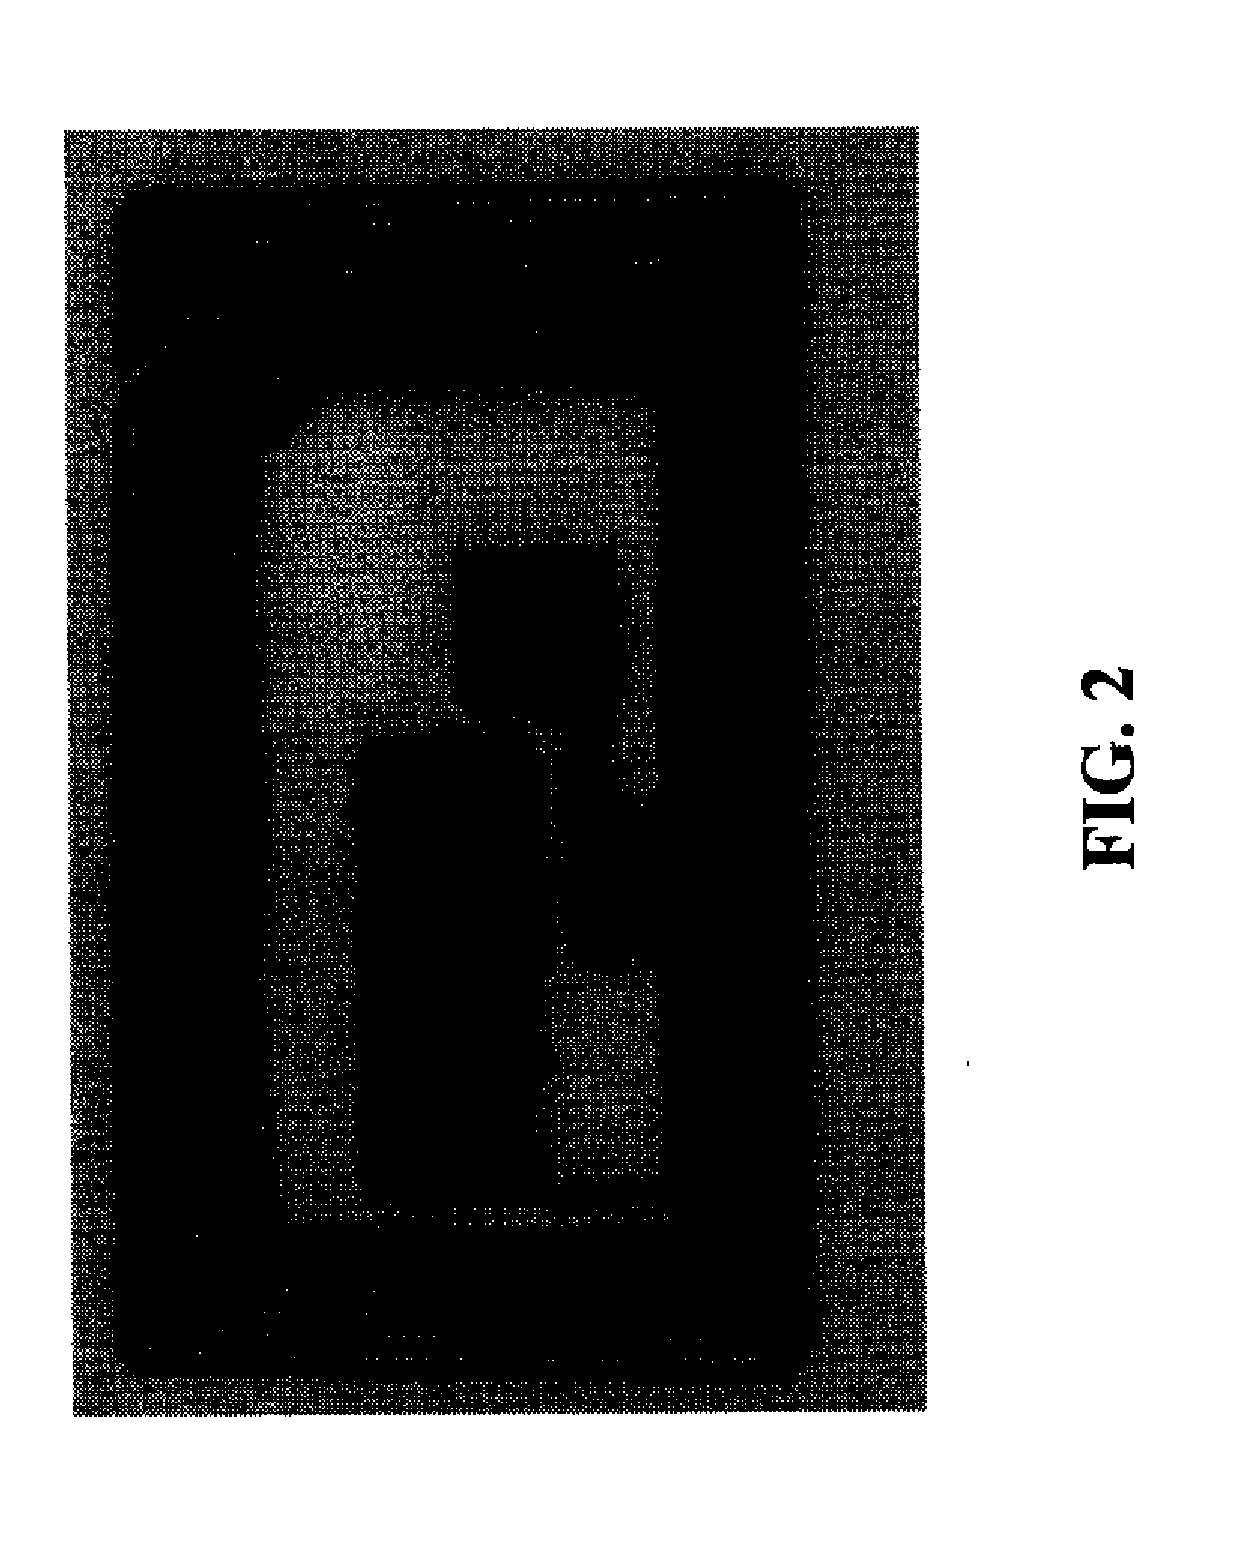 Method of making silver-containing dispersions